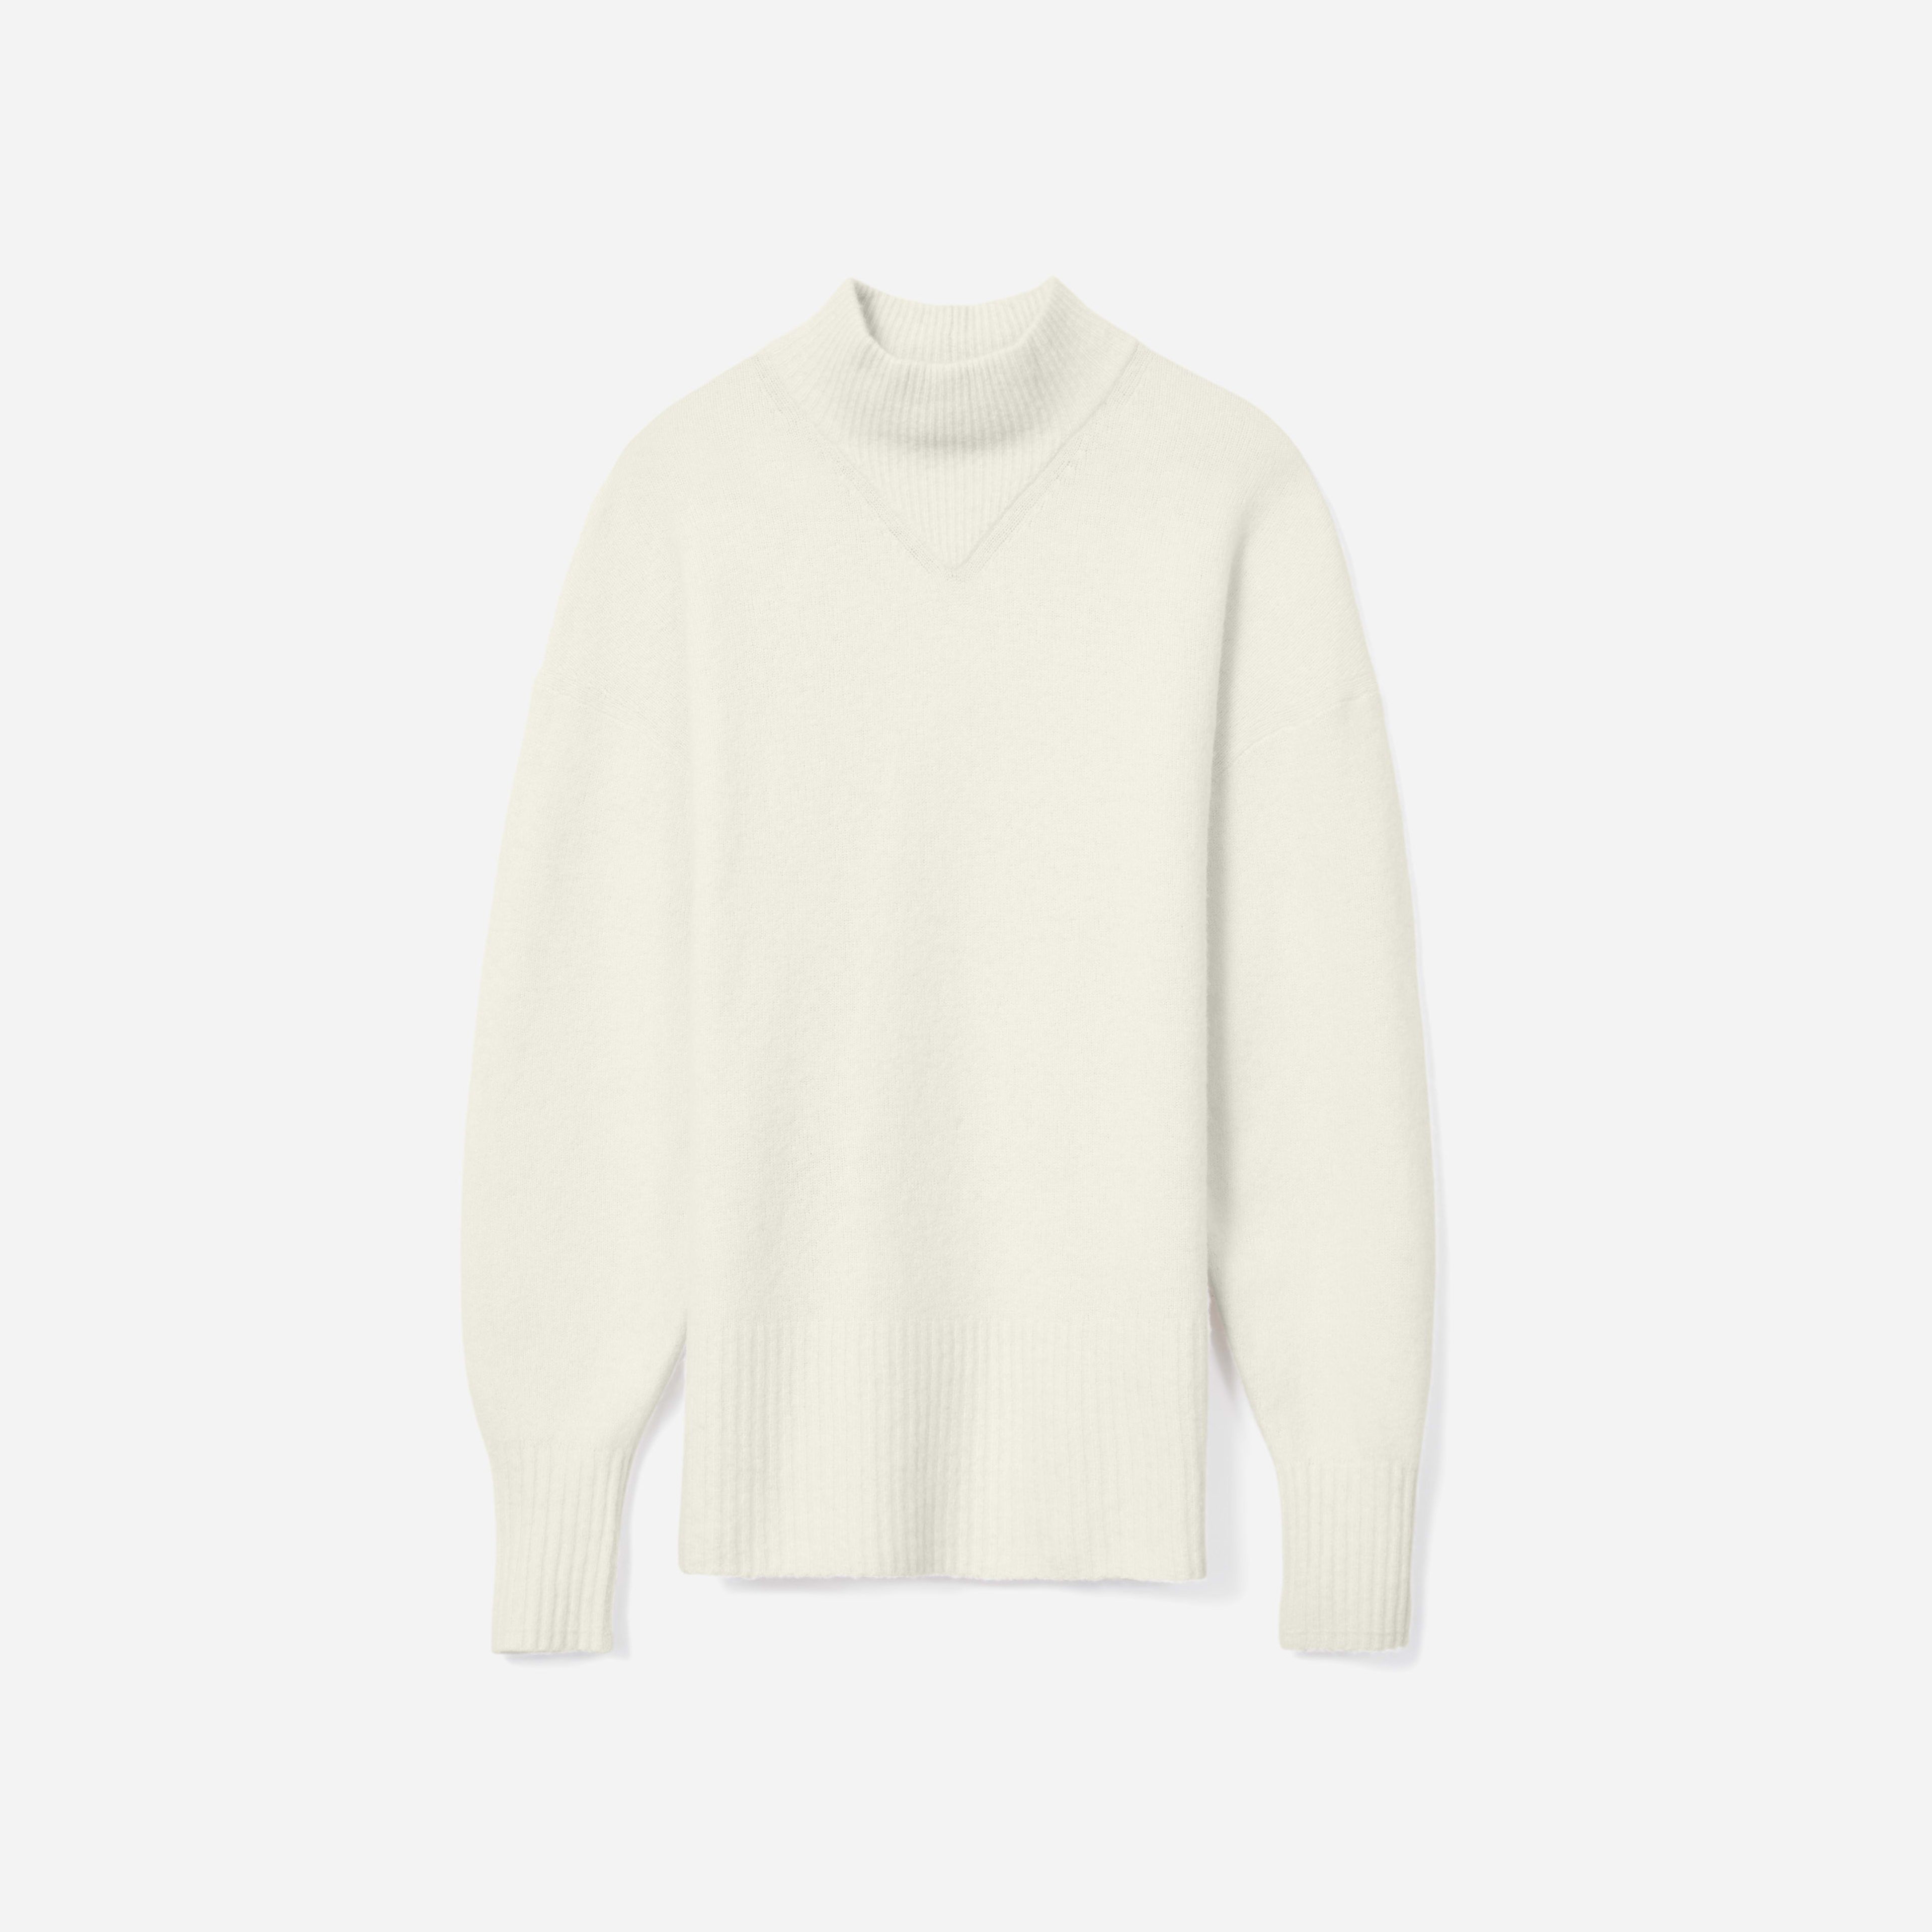 The Cozy-Stretch Pullover | Everlane